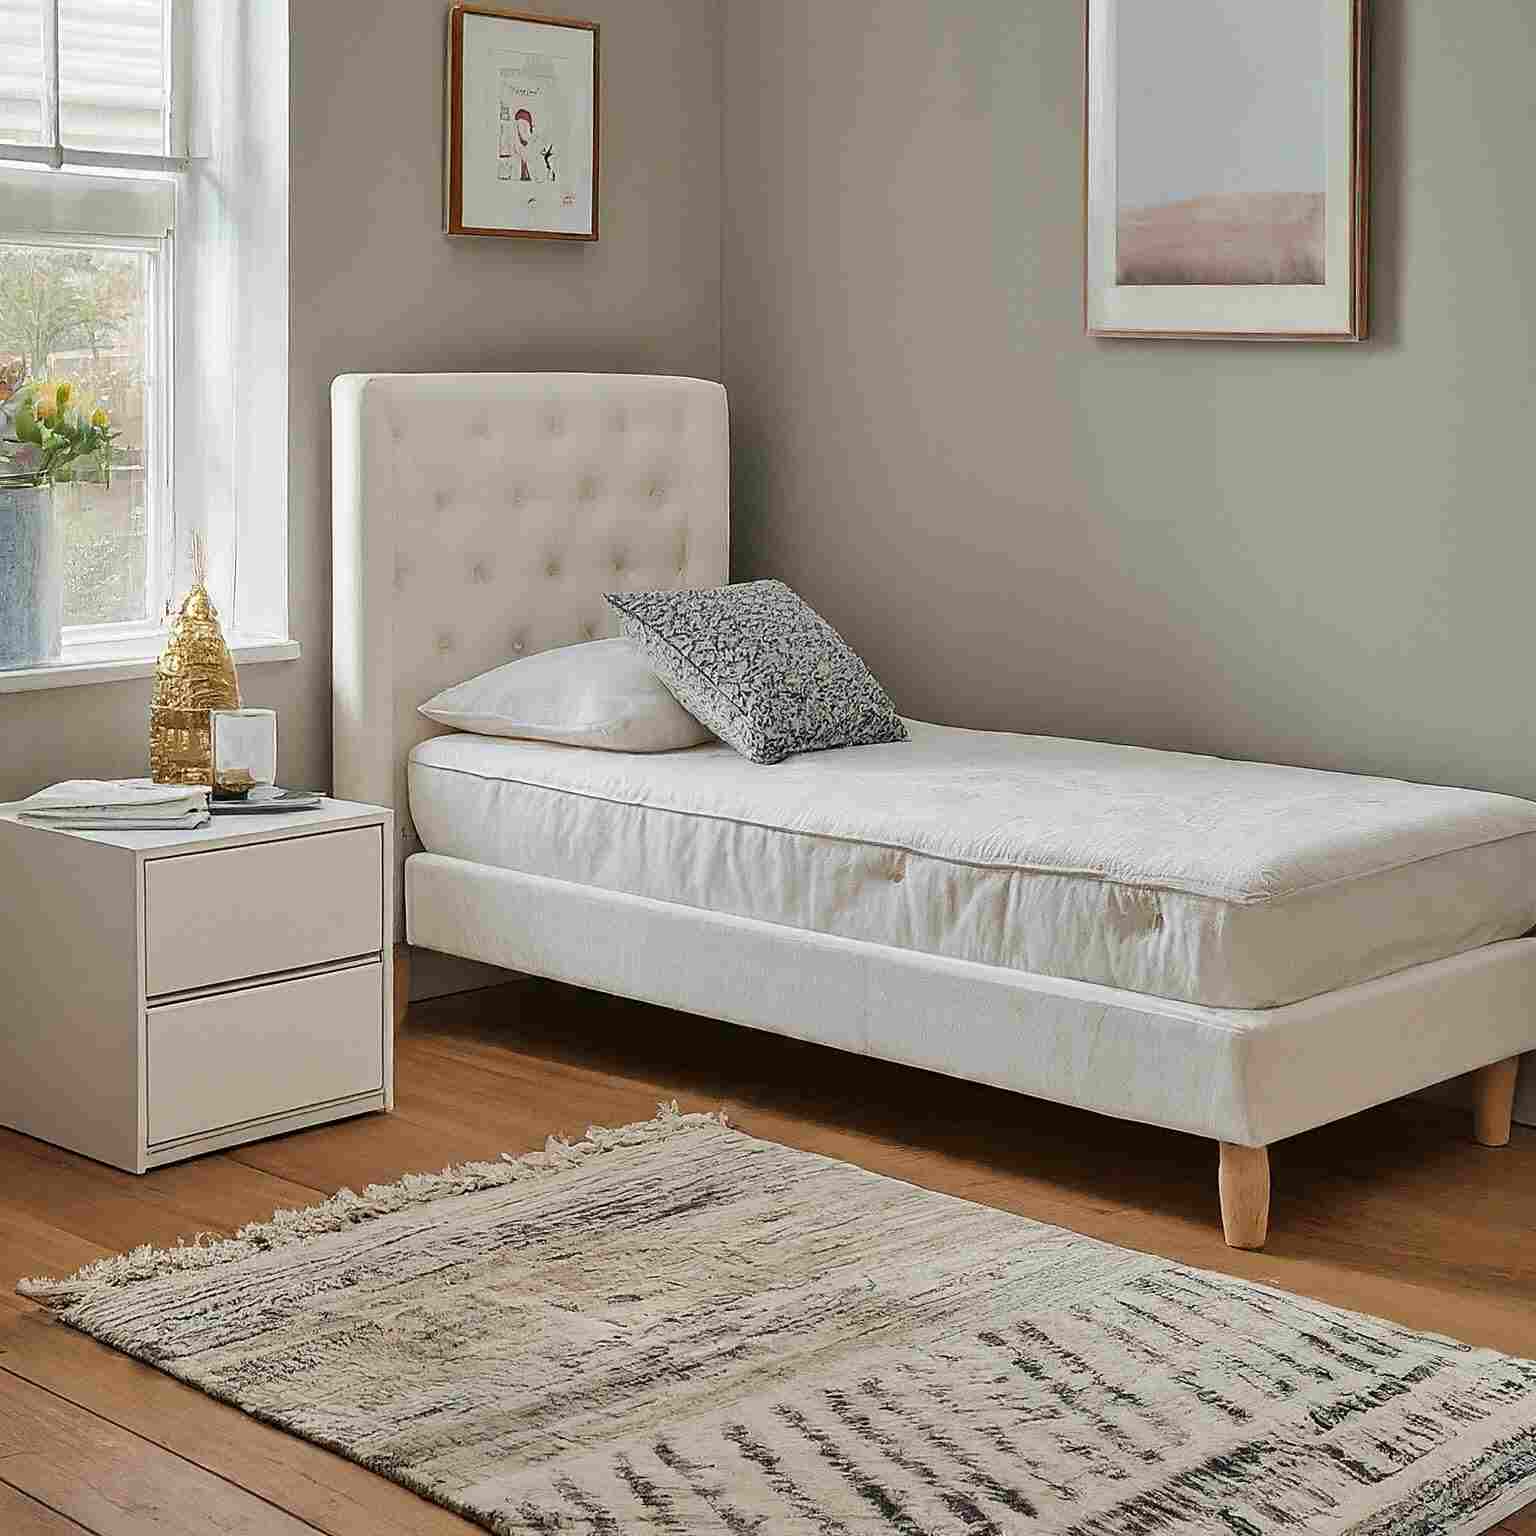 3ft Single Bed with Mattress